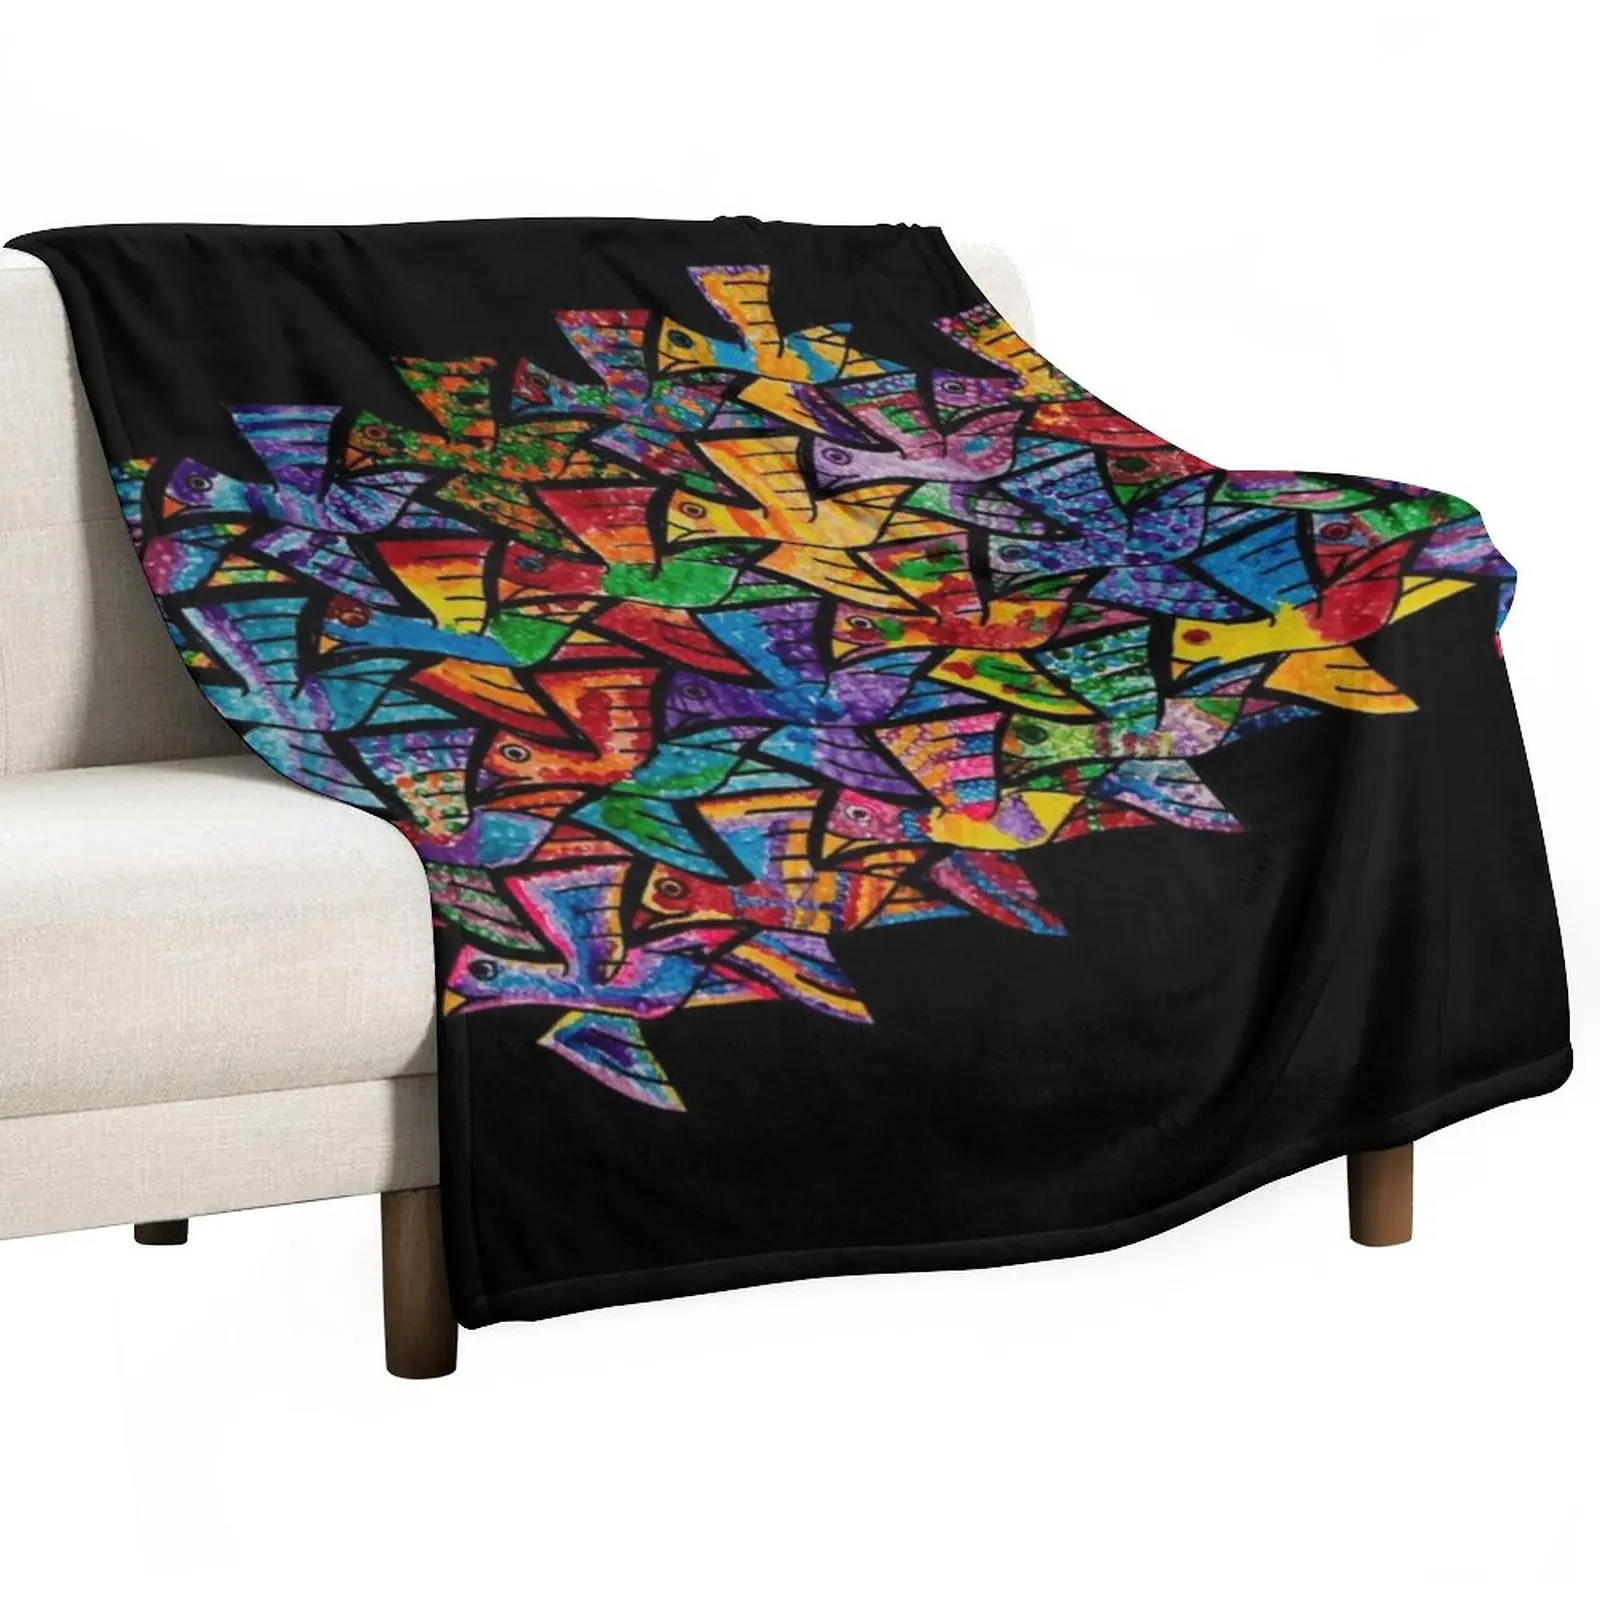 

New HHPS Art Show, Class 1W, Paint: Together We Fly Throw Blanket Picnic Blanket Loose Blanket